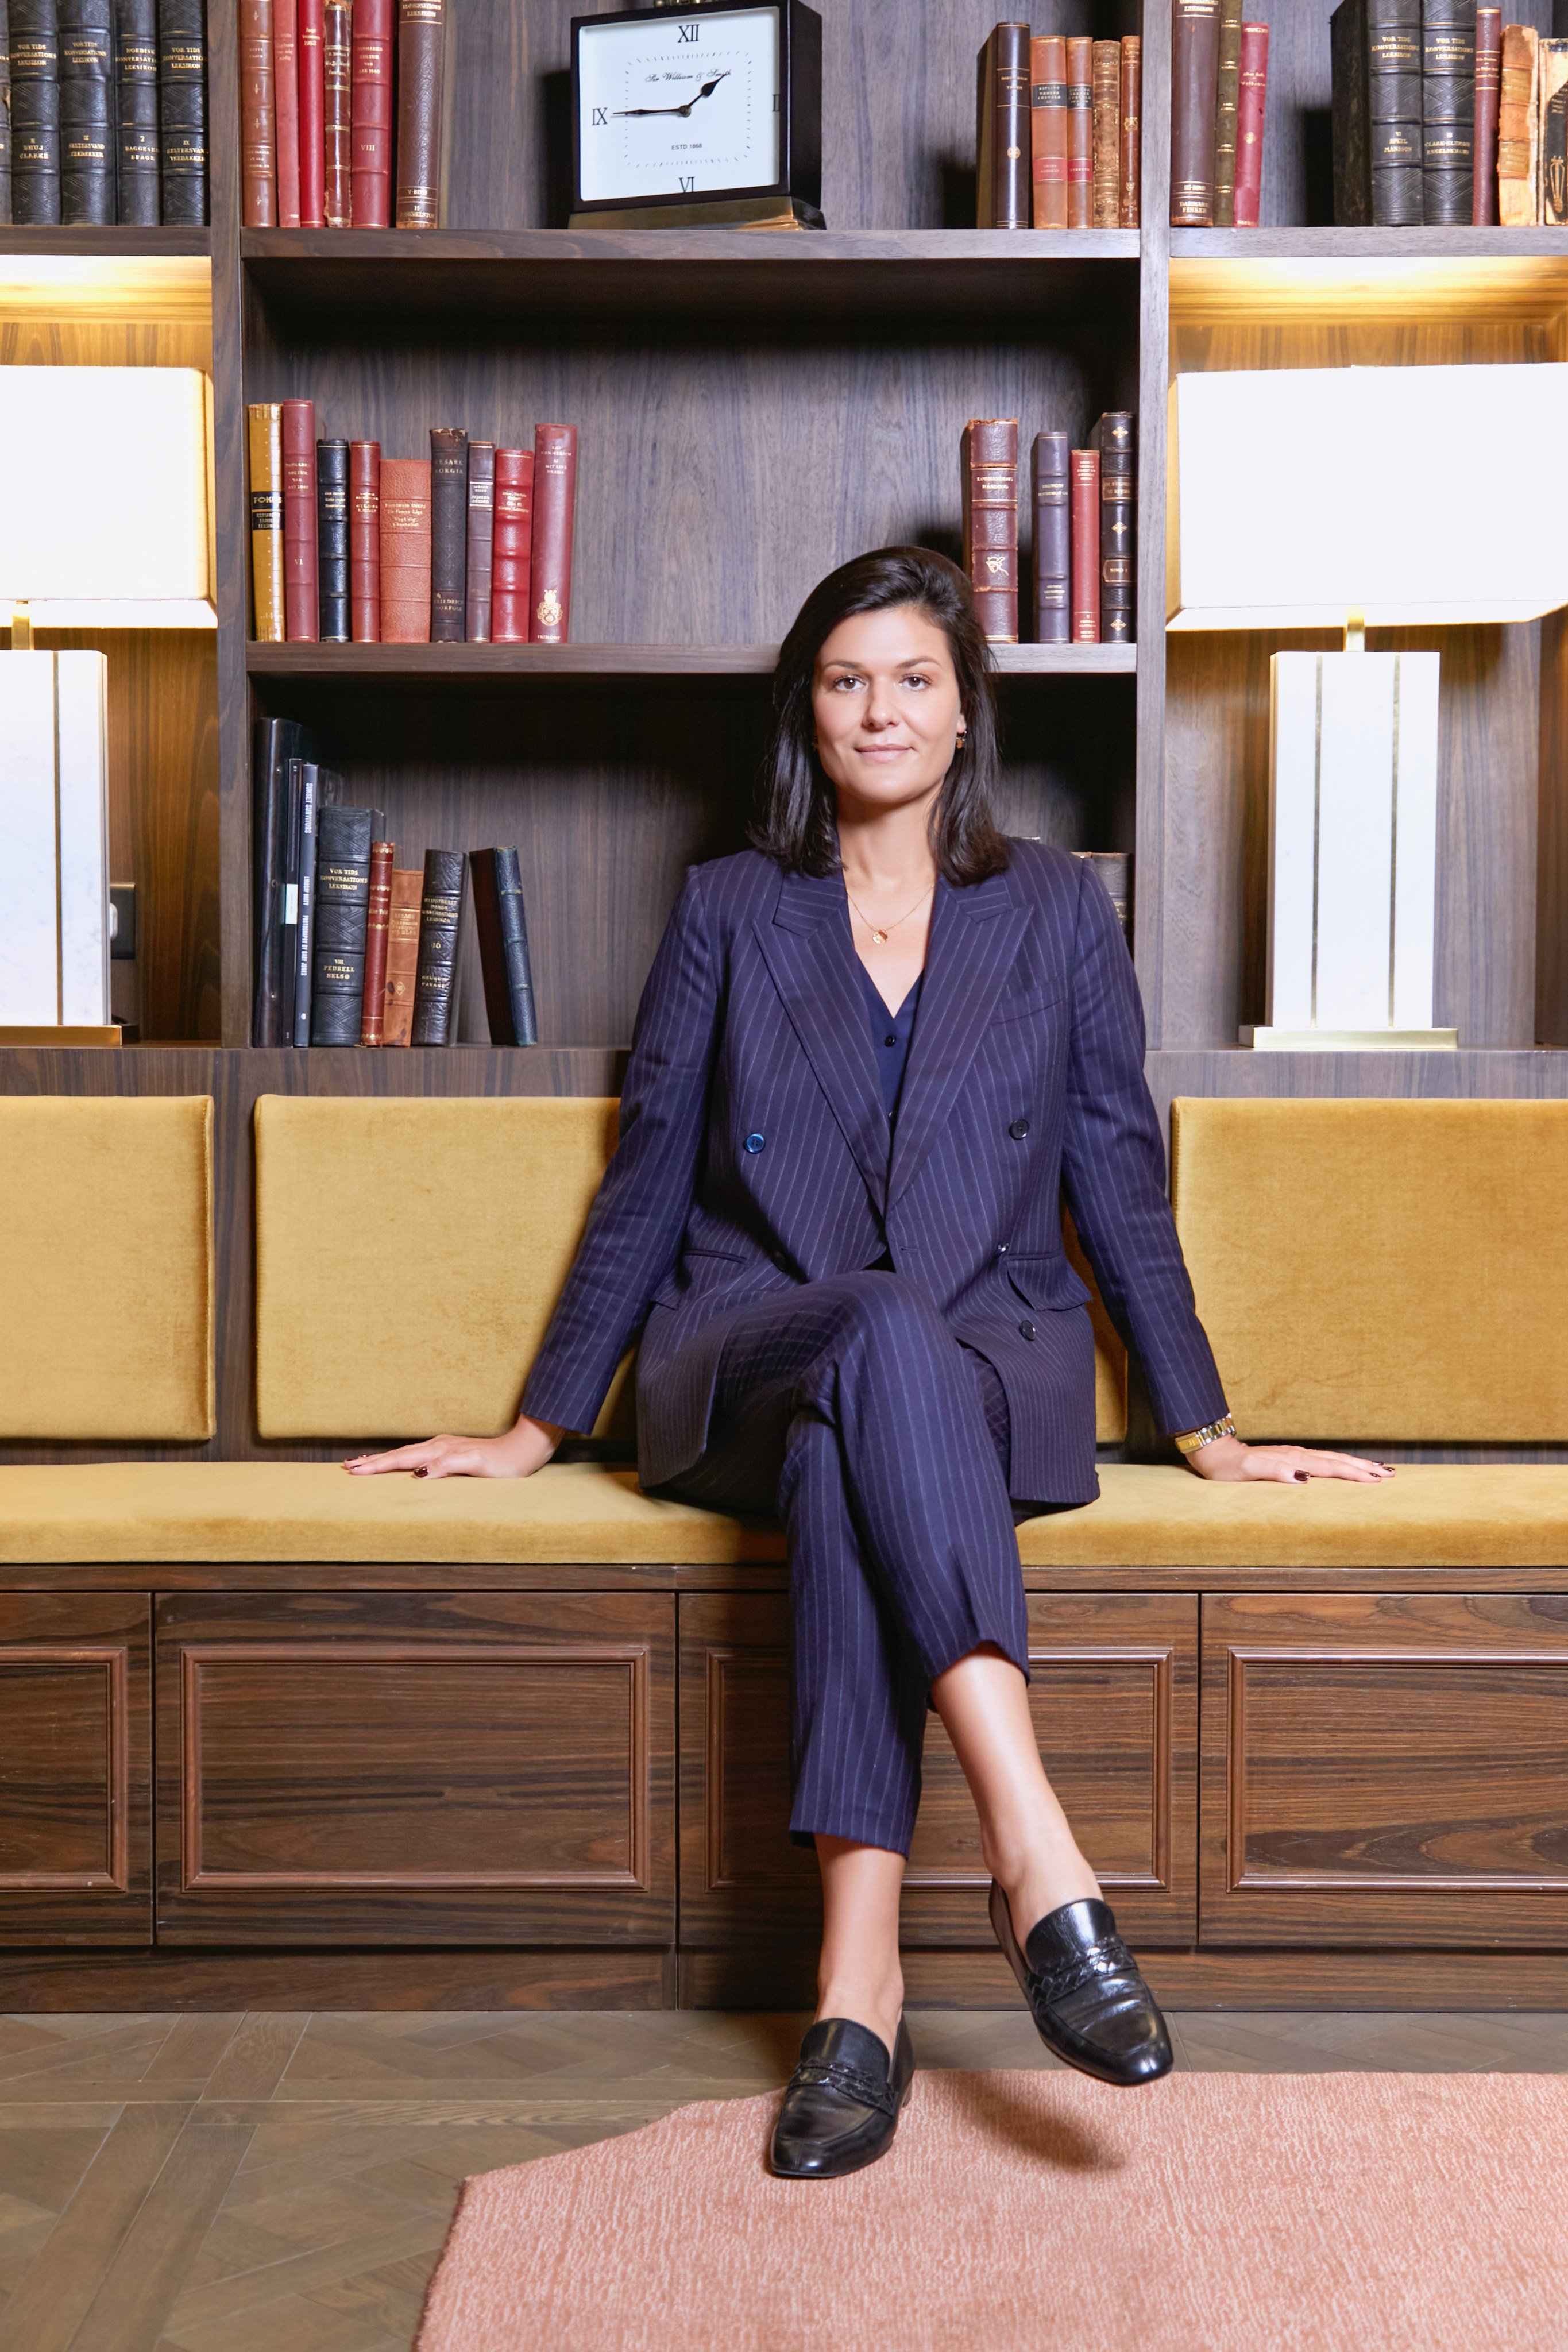 Frederieke van Doorn is the founder and CEO of Hong Kong-based women’s tailoring brand Frey. Photo: Frey